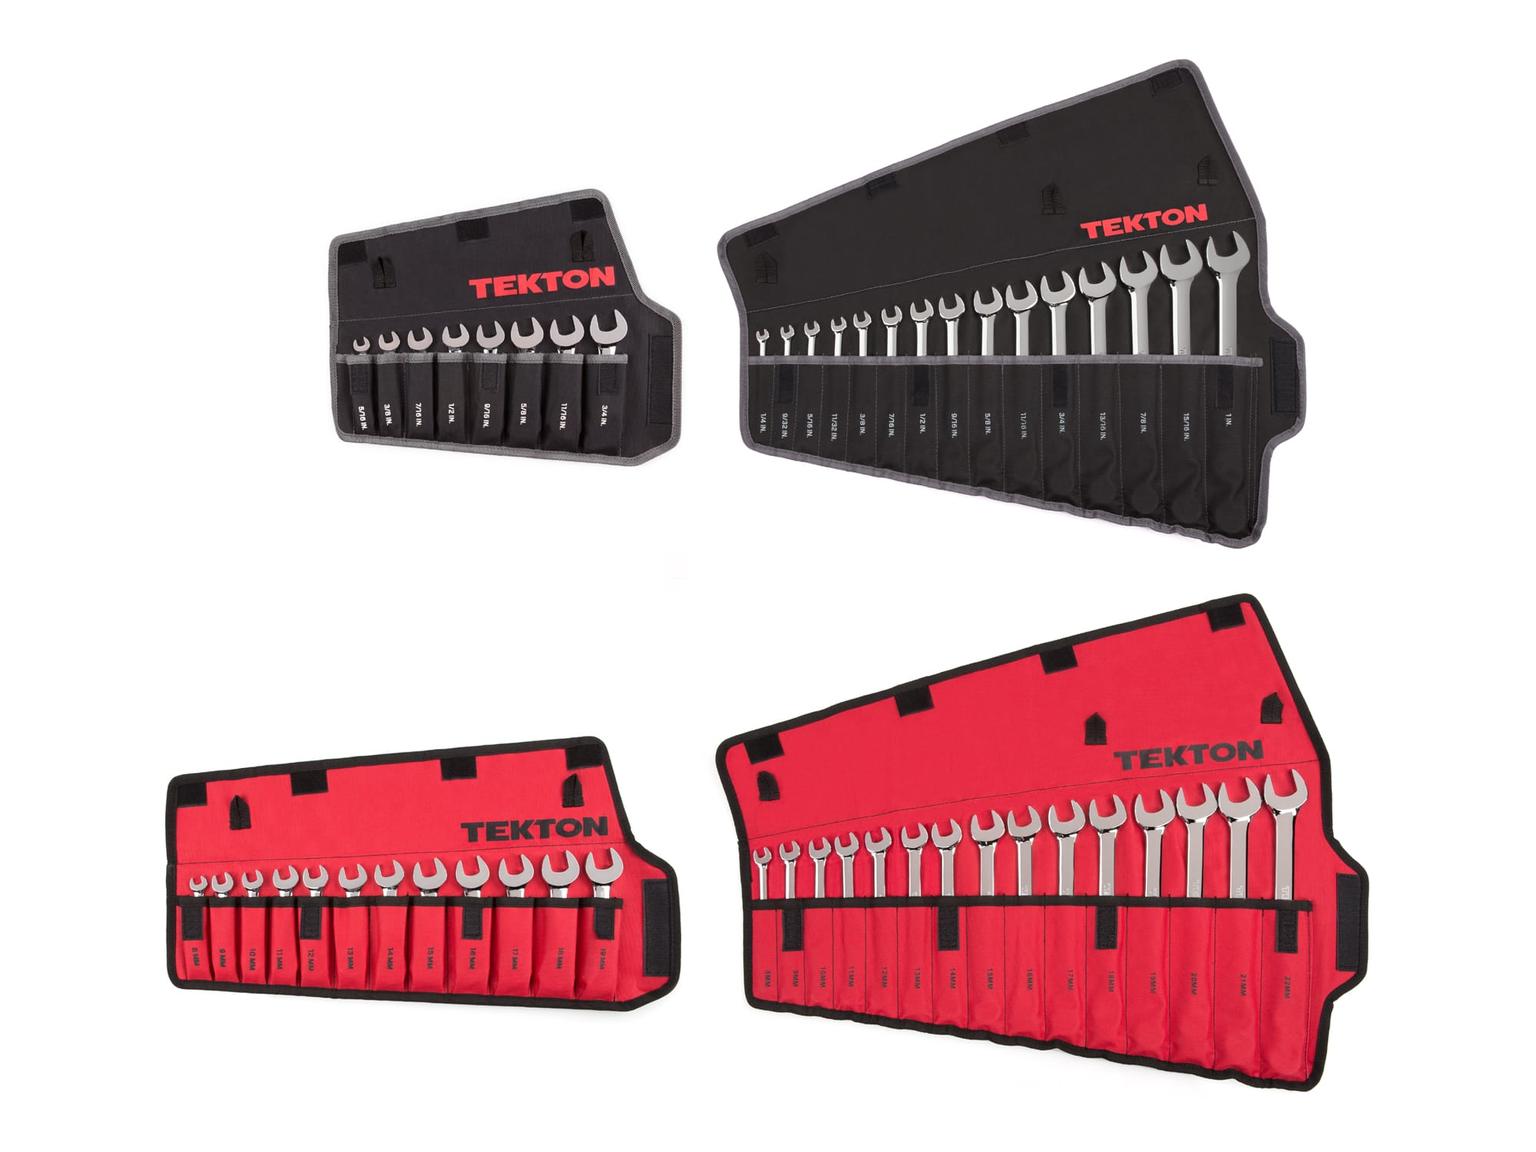 TEKTON WCB94901-T Stubby and Standard Length Combination Wrench Set with Pouch, 50-Piece (1/4-1 in., 8-22 mm)